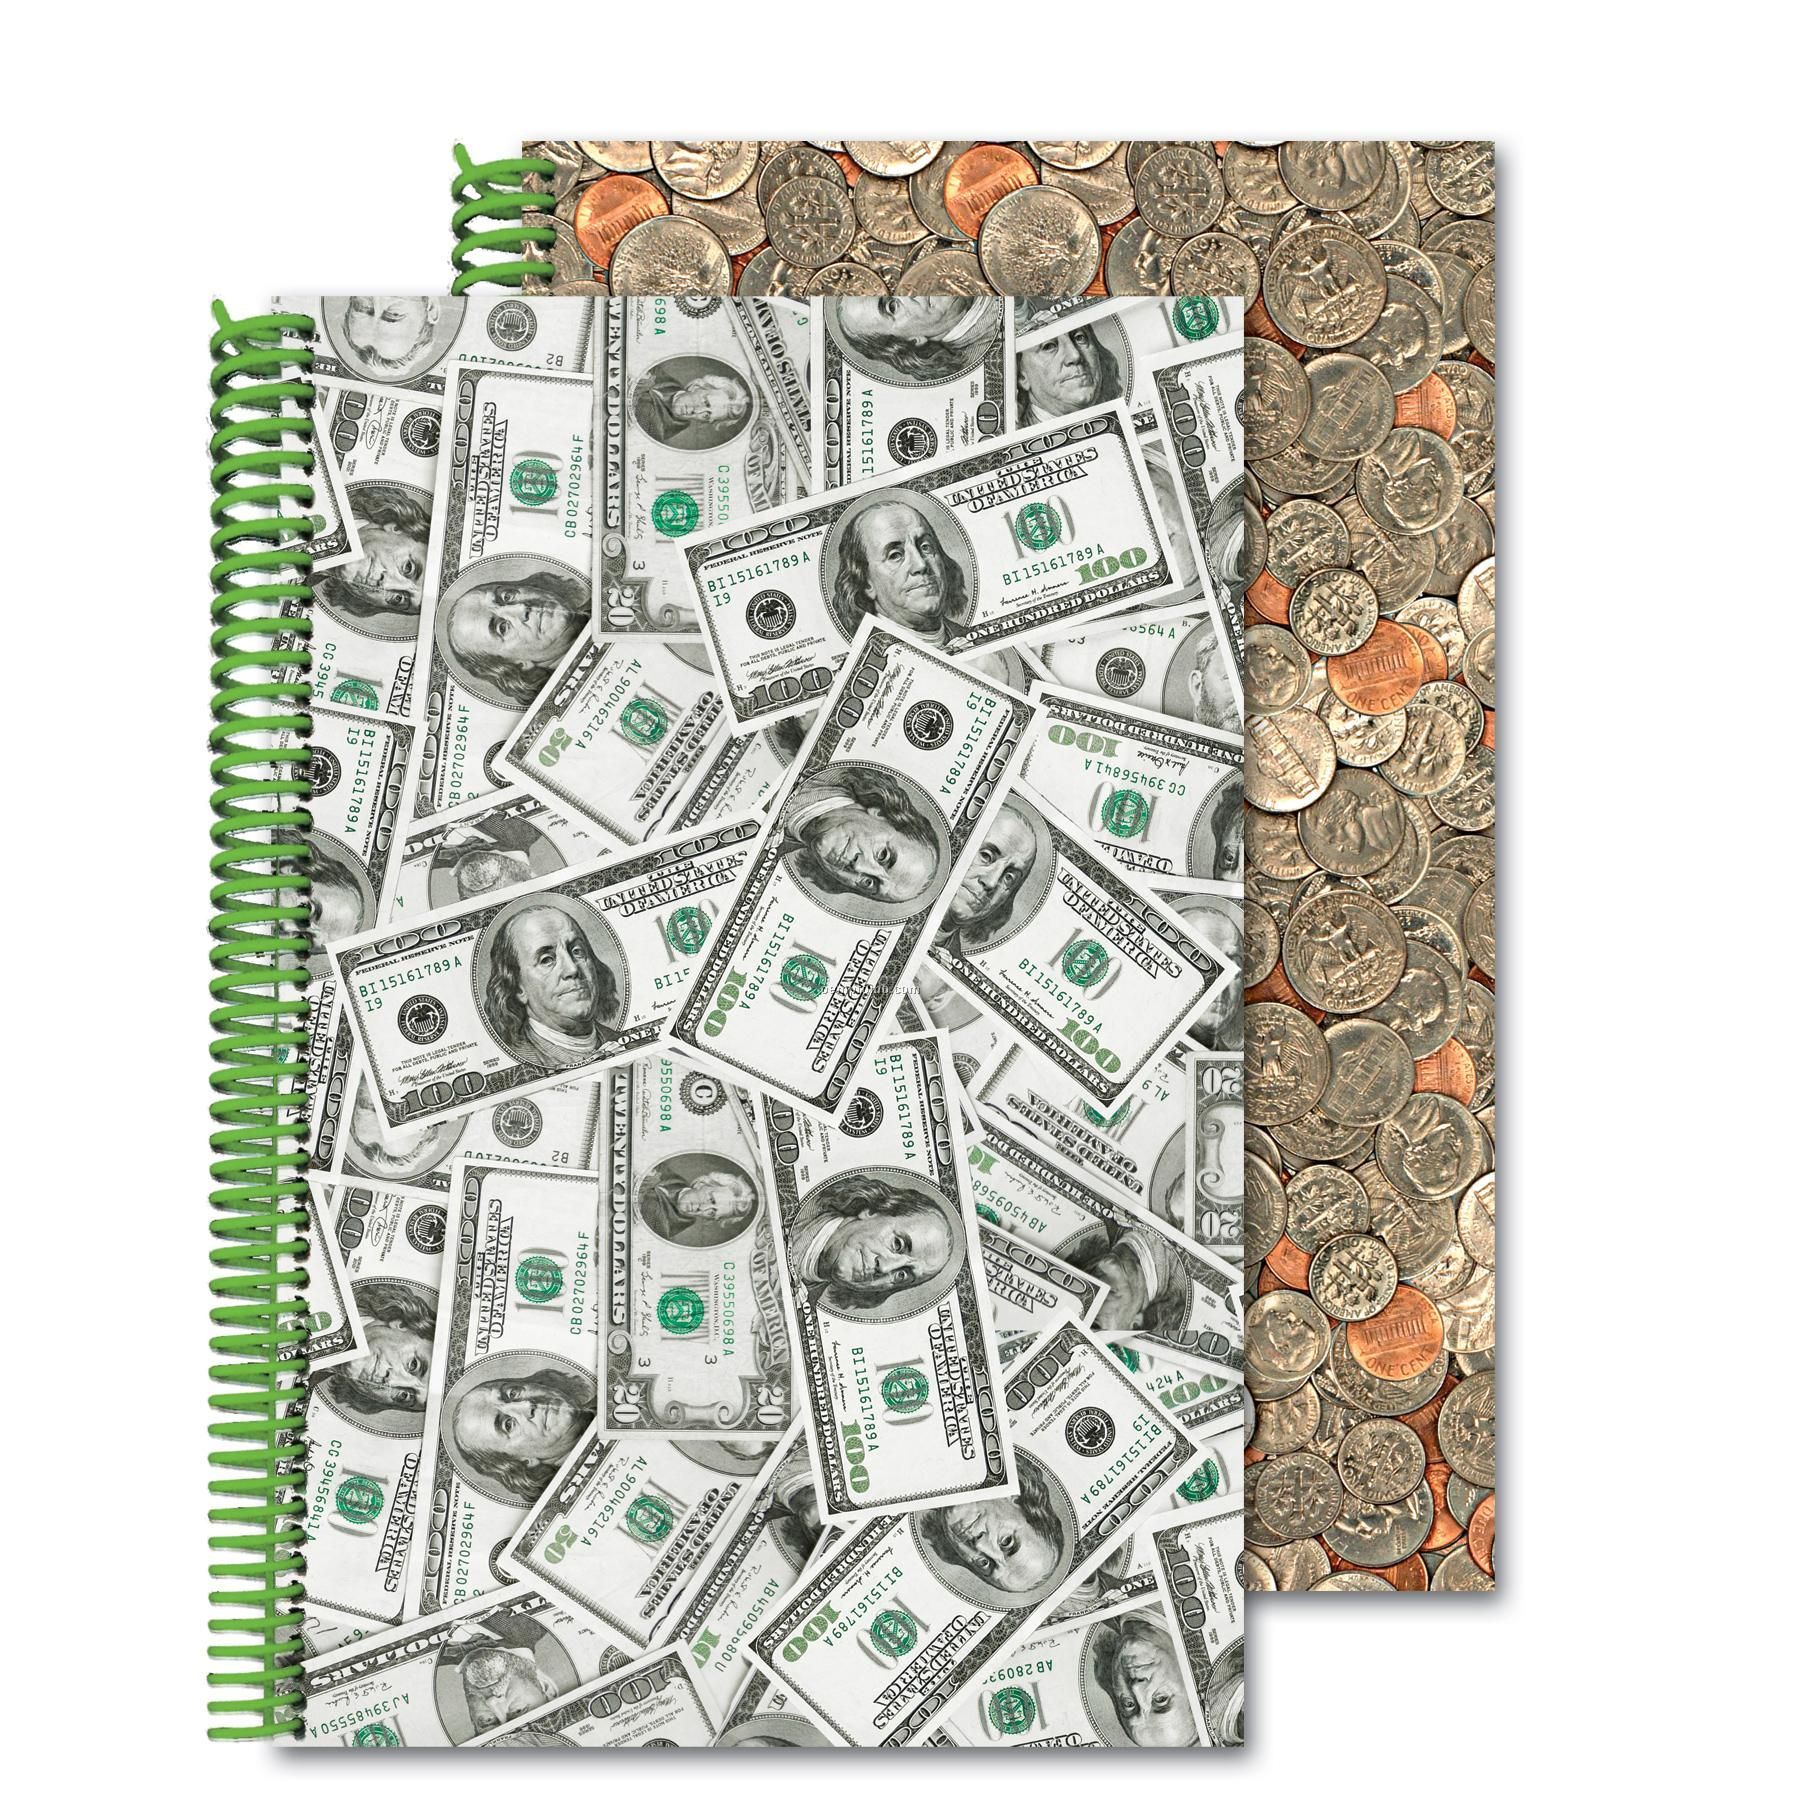 3d Lenticular Notebook Stock/Dollars And Cents (Blanks)